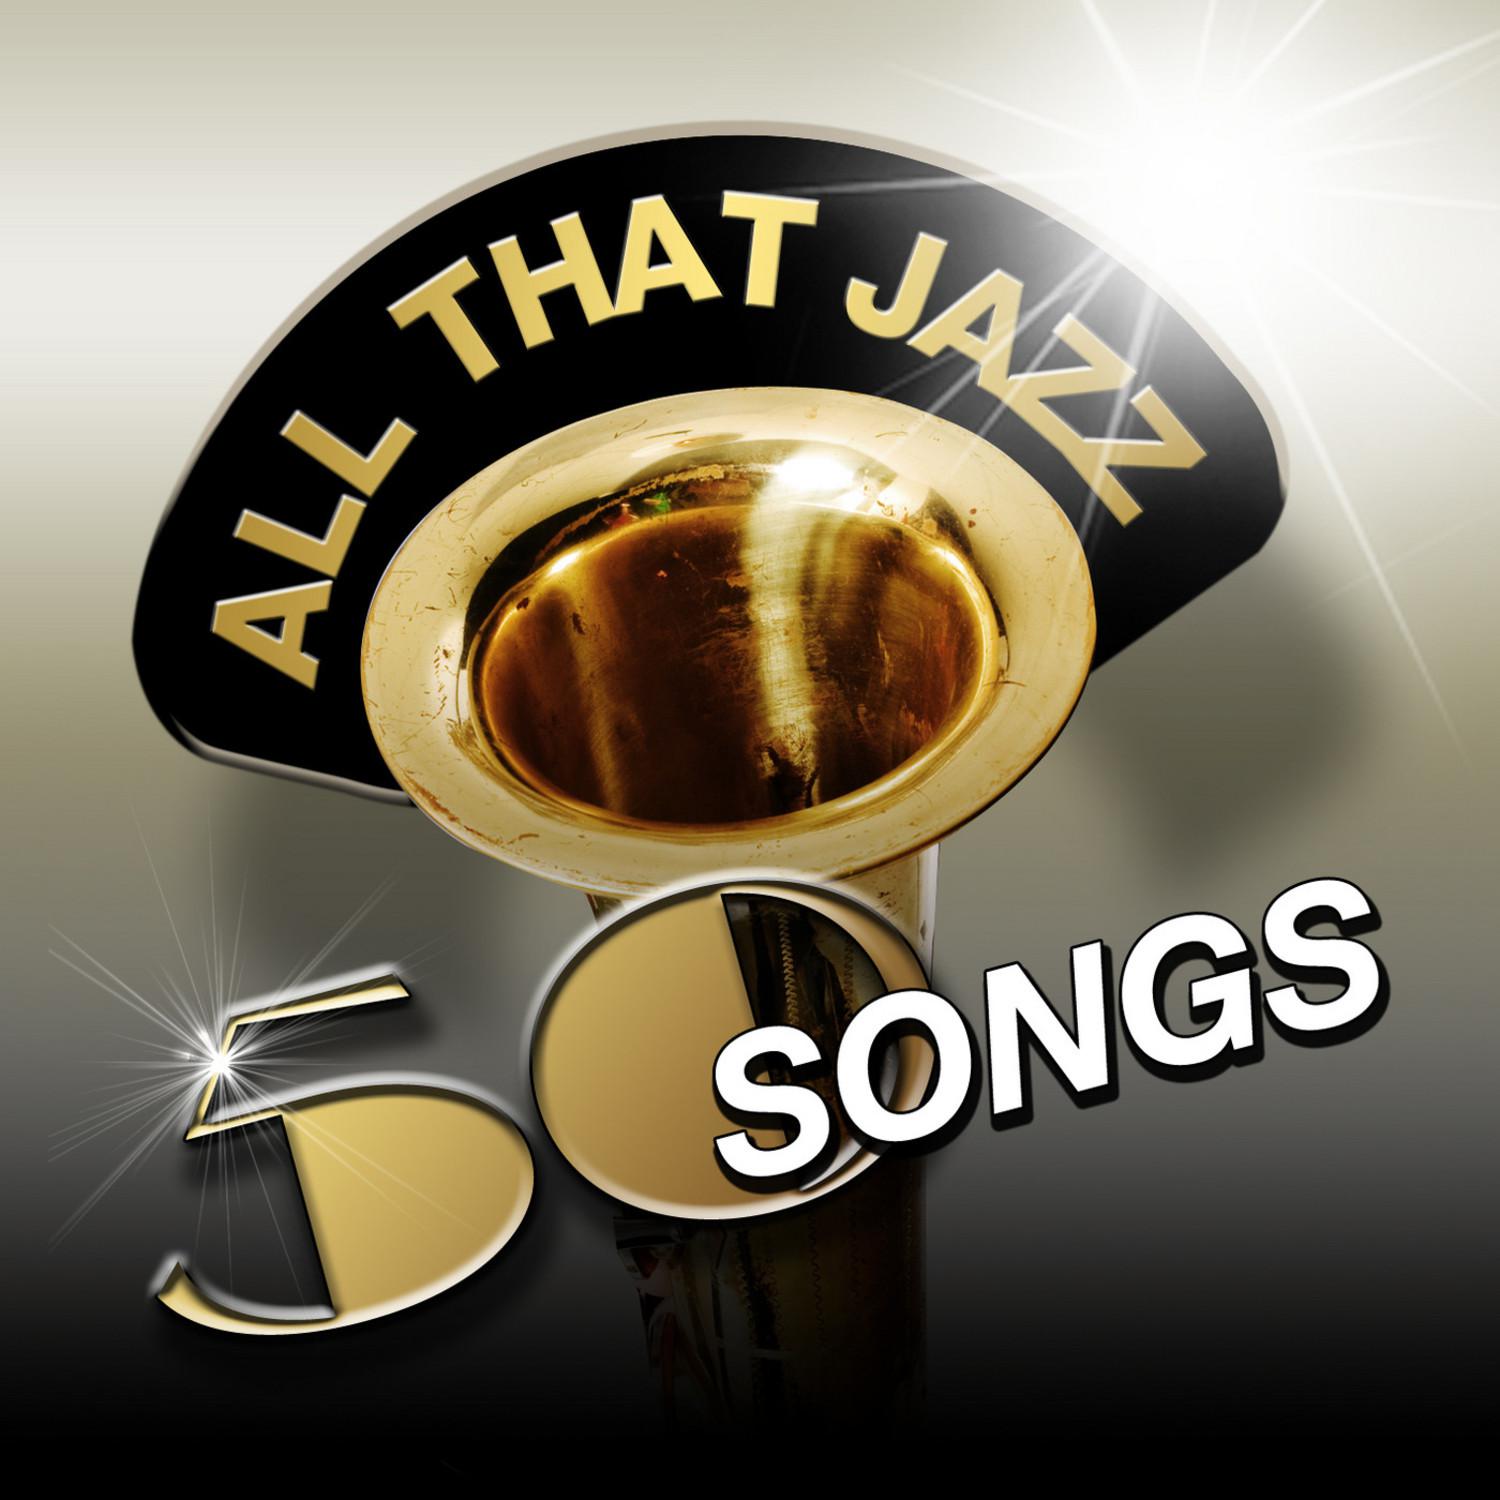 All That Jazz - 50 Songs